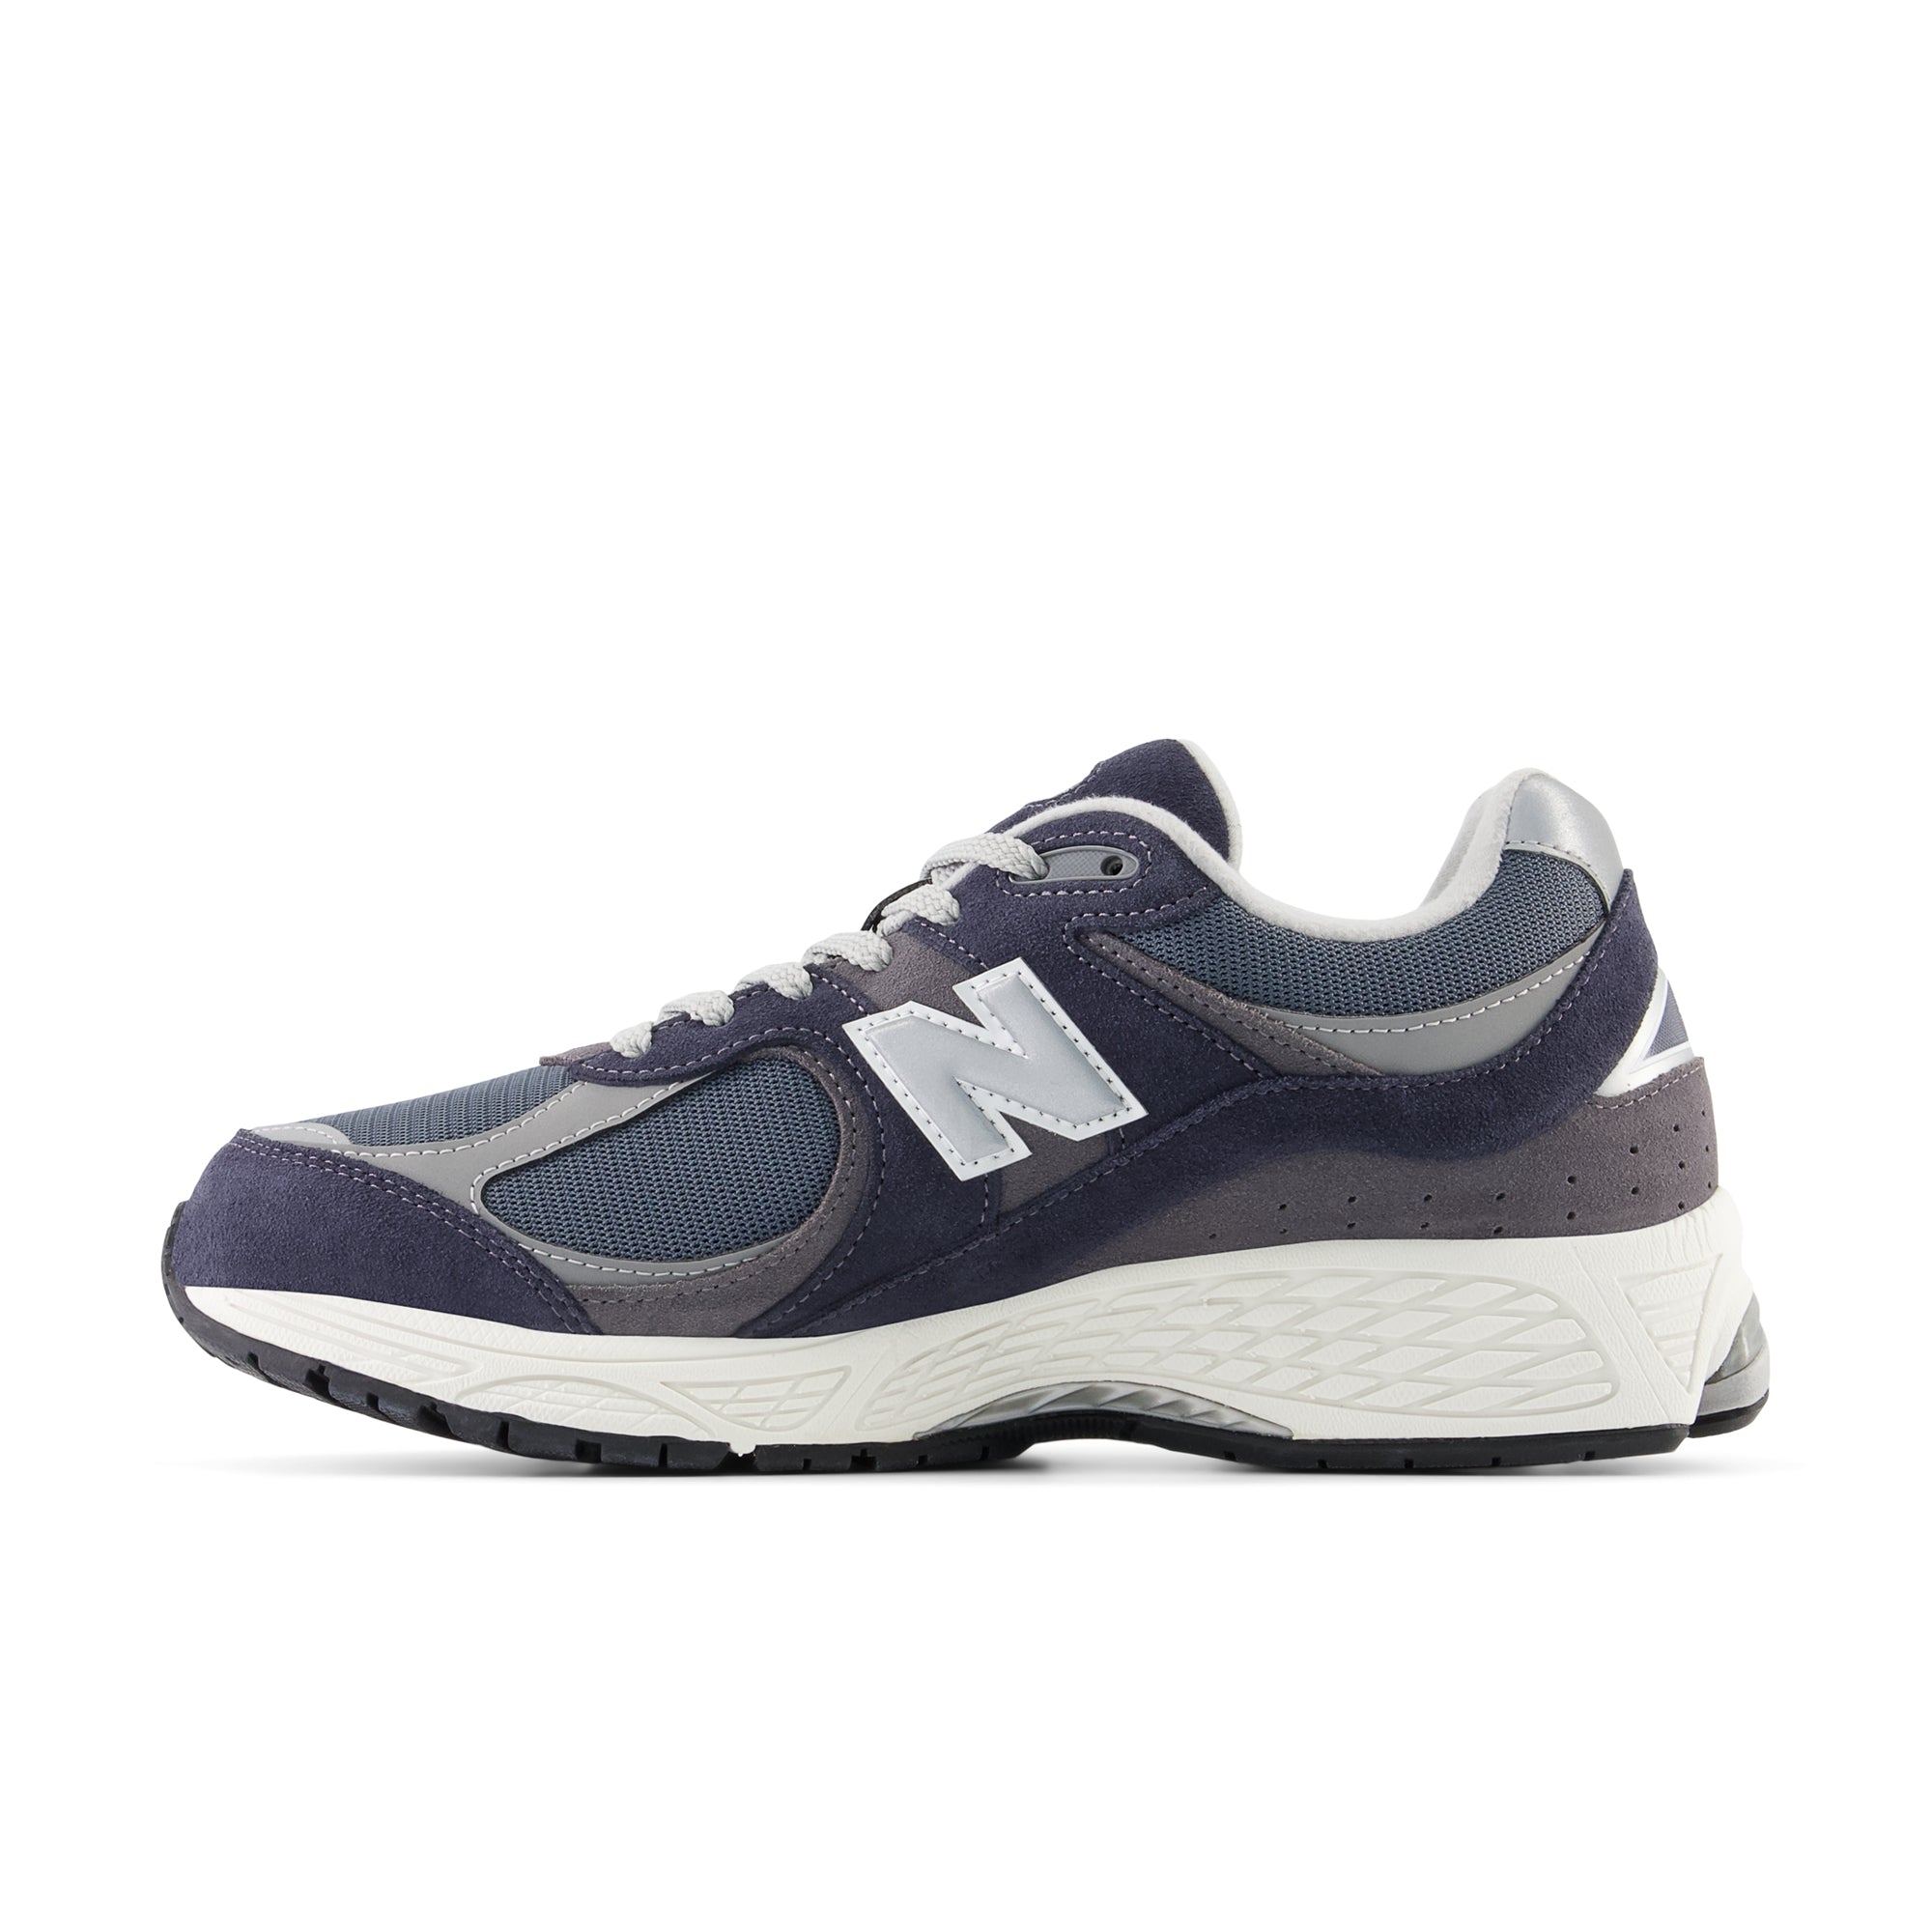 NEW BALANCE - M2002Rsf - (Navy) view 2